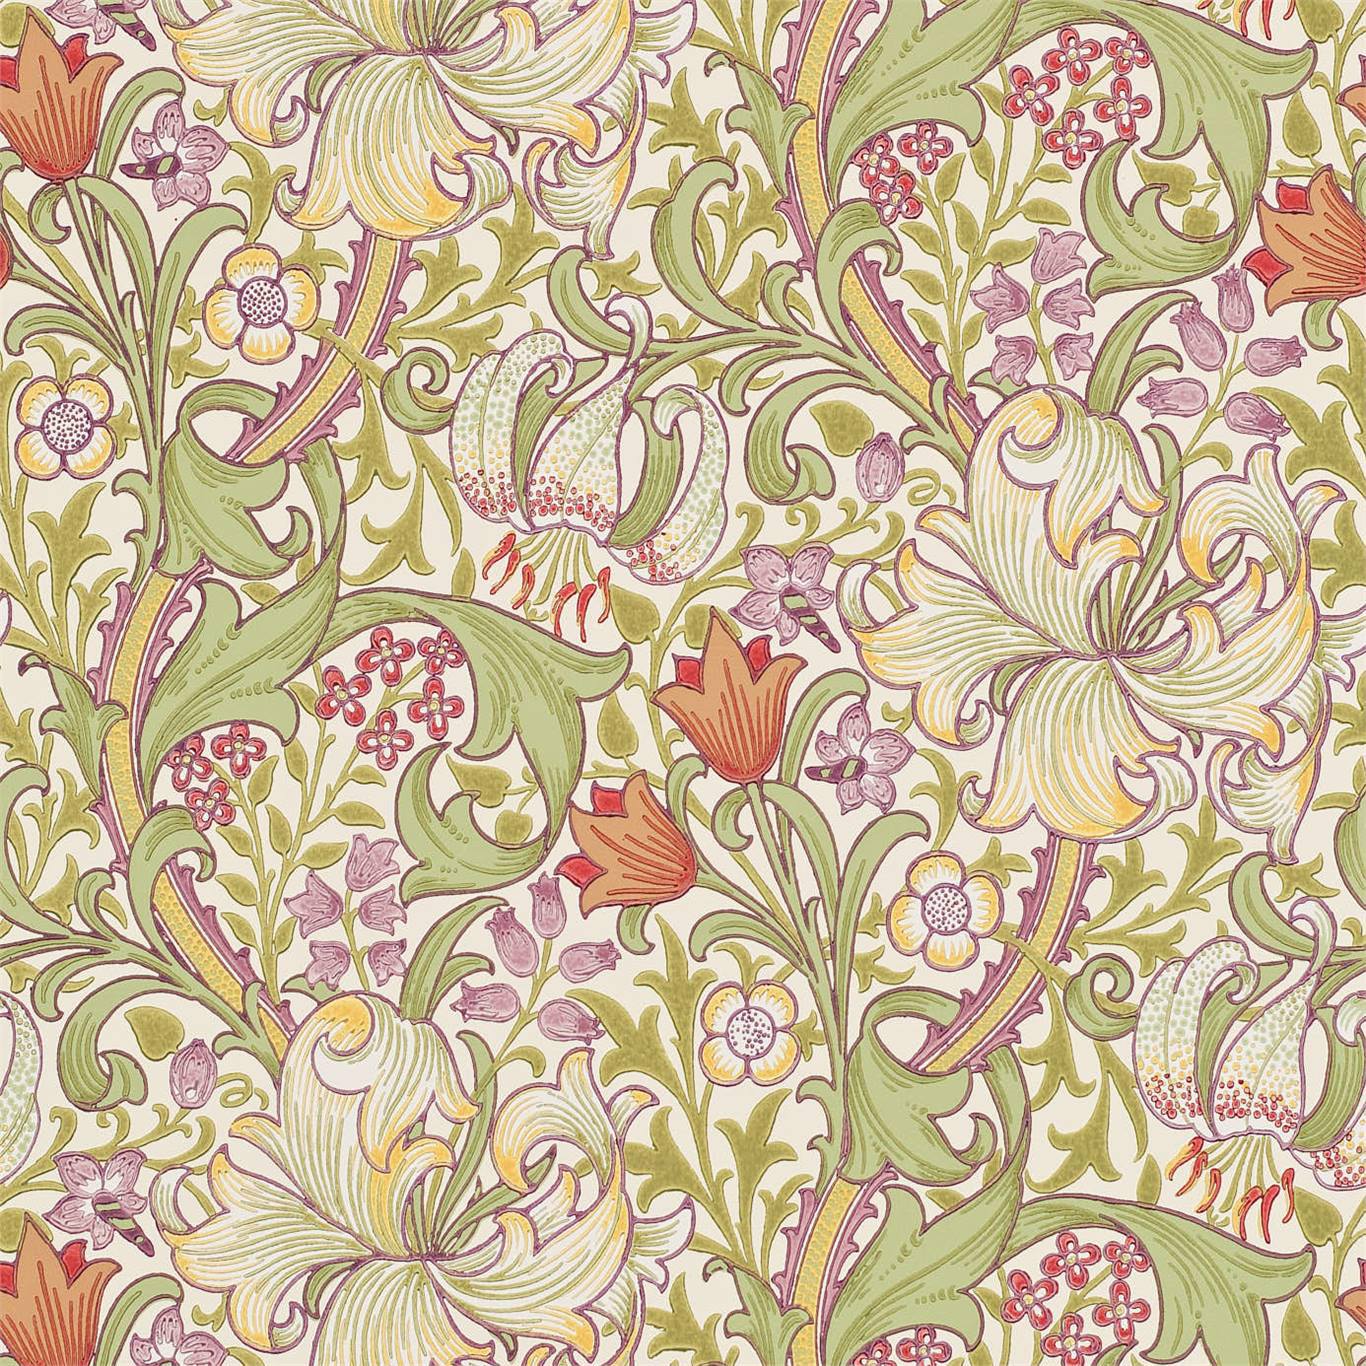 Golden Lily Olive/Russet Wallpaper DCMW216834 by Morris & Co